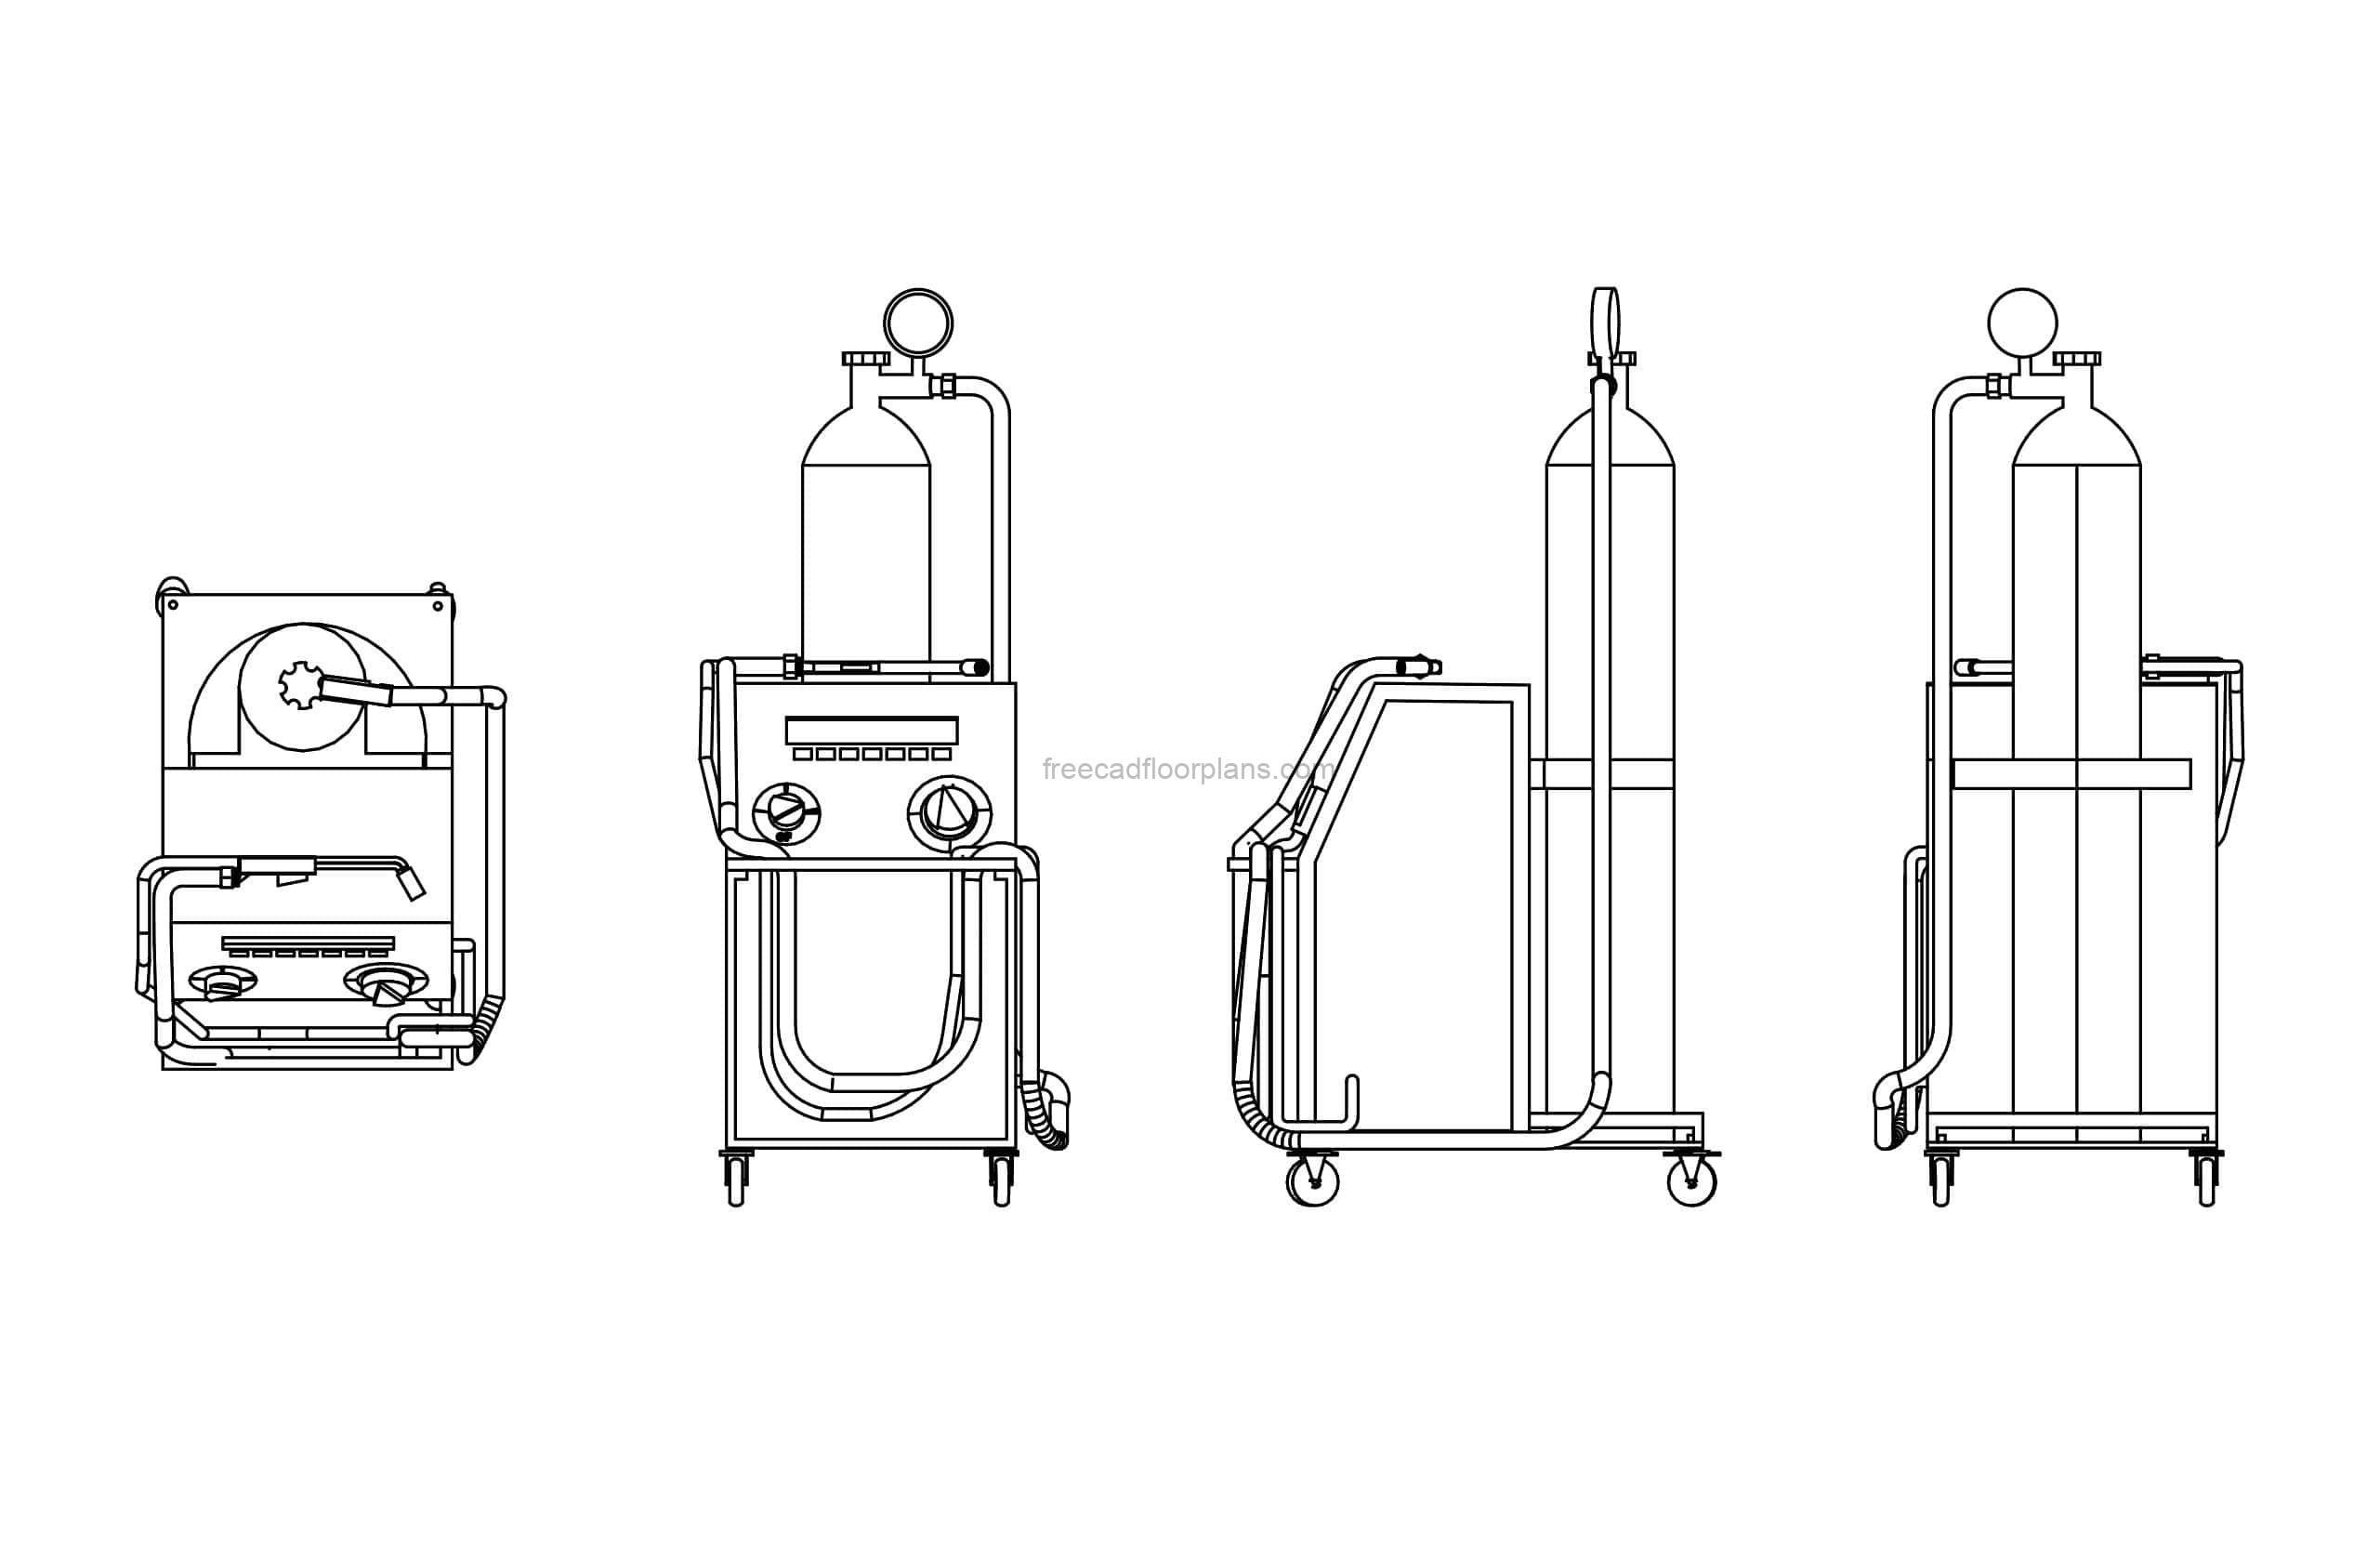 welding machine cart in dwg cad model drawing for free download